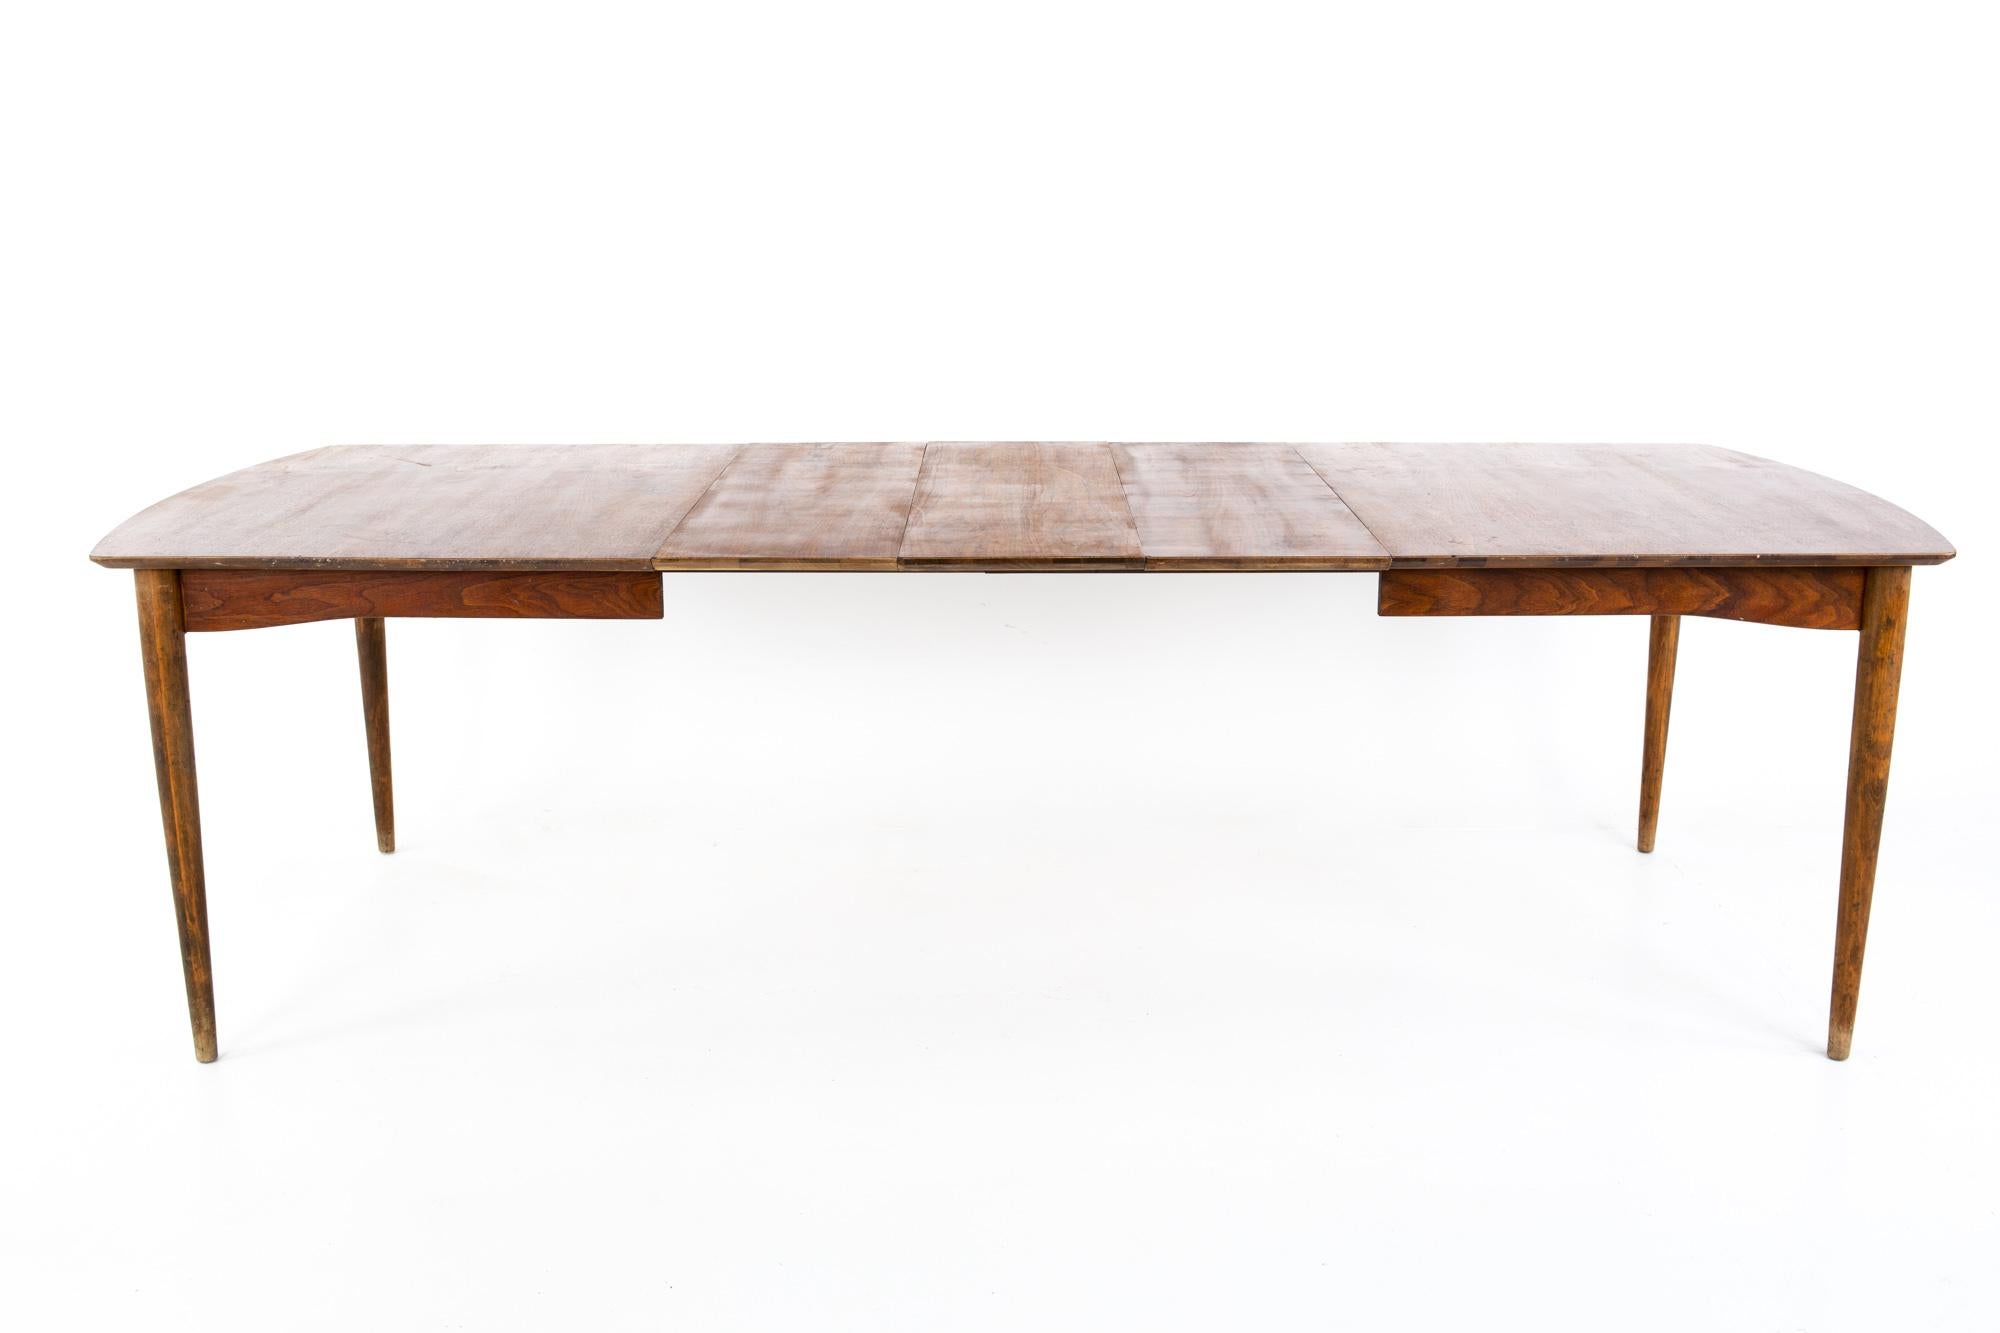 Kipp Stewart for Drexel Declaration style Morganton midcentury 10 person walnut dining table
Table measures: 62 wide x 38 deep x 28 inches high and there are 3 leaves; each leaf is 12 inches wide 

Each piece of furniture is available in what we